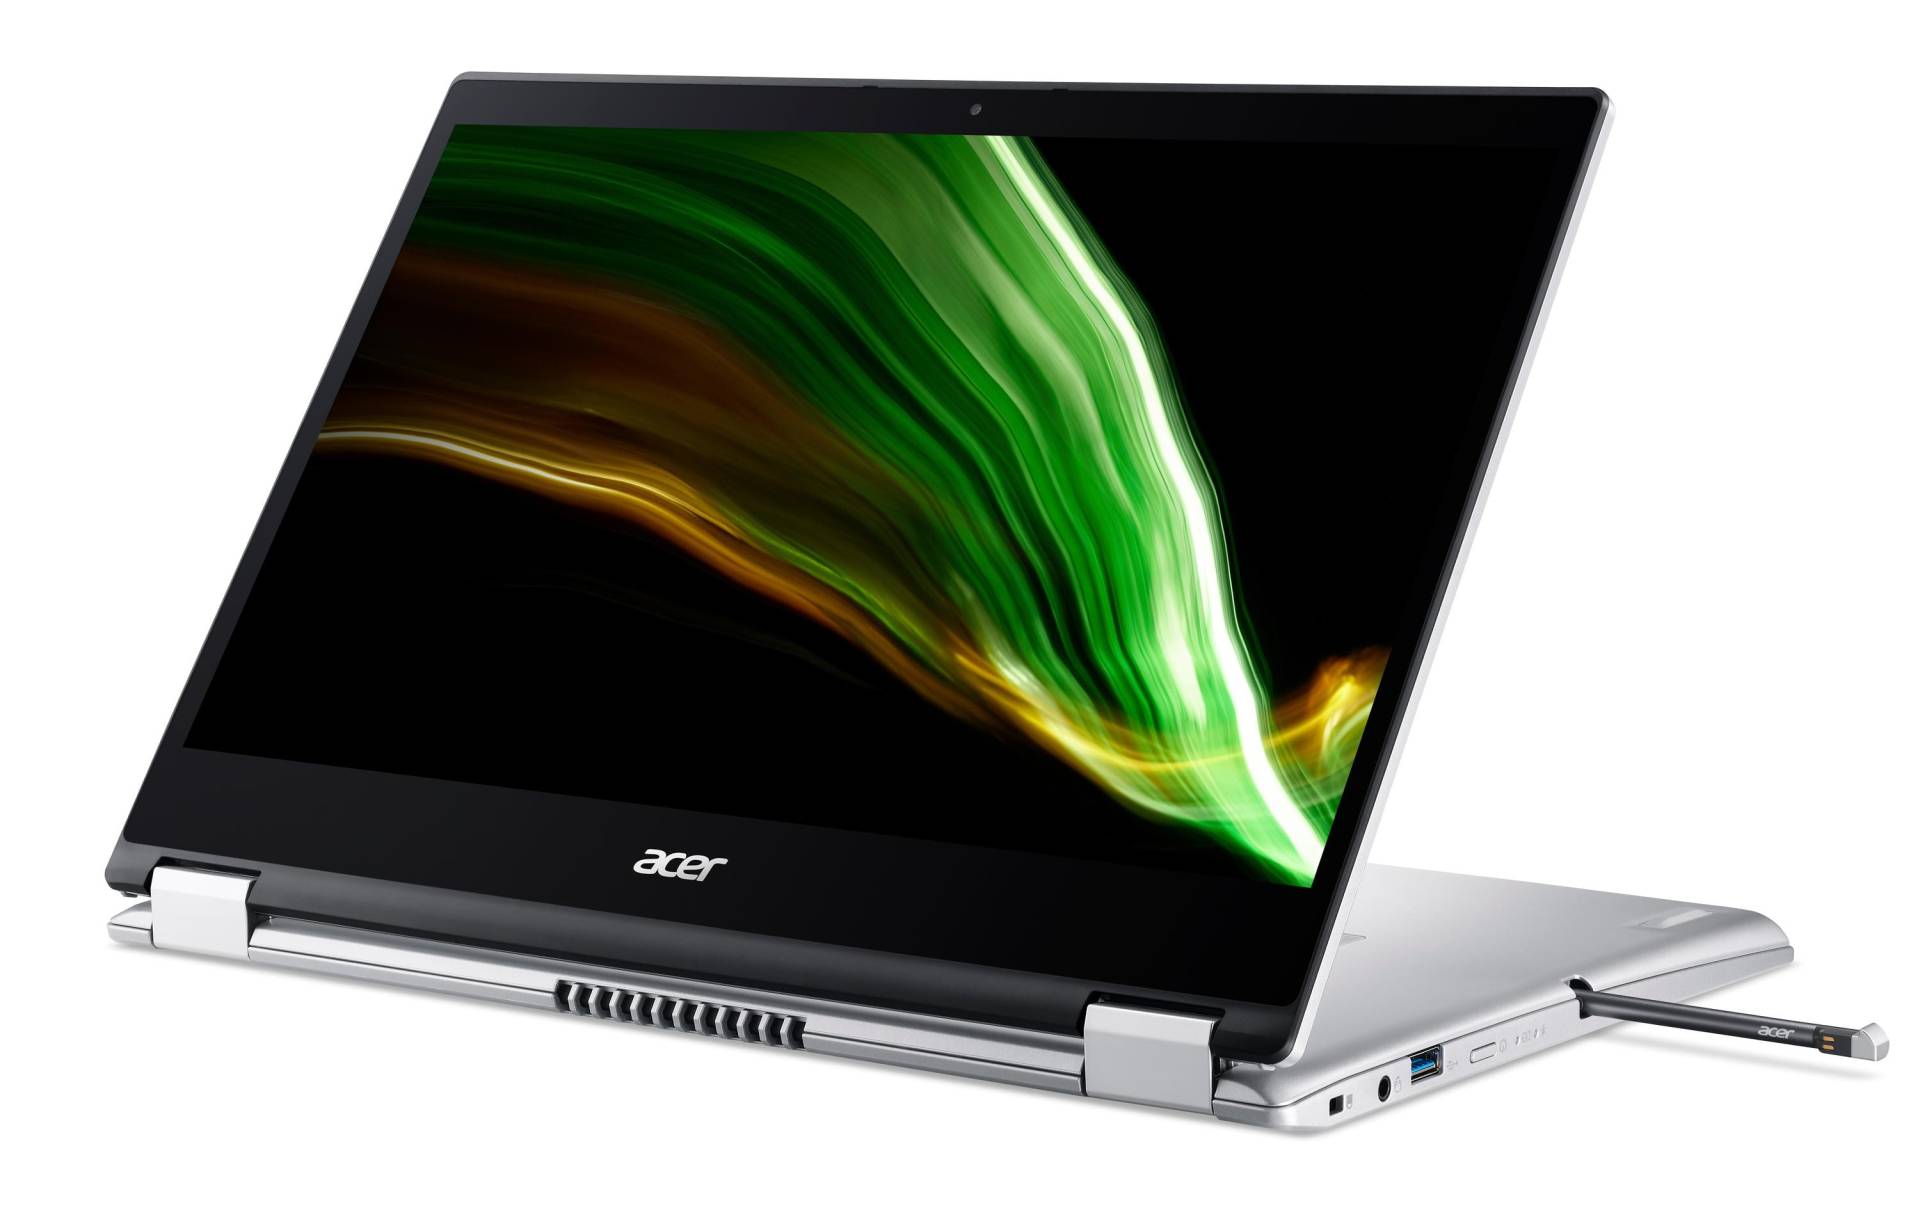 Acer Notebook »Spin 1«, 35,56 cm, / 14 Zoll, Intel, Pentium Silber, UHD Graphics, 256 GB SSD von Acer